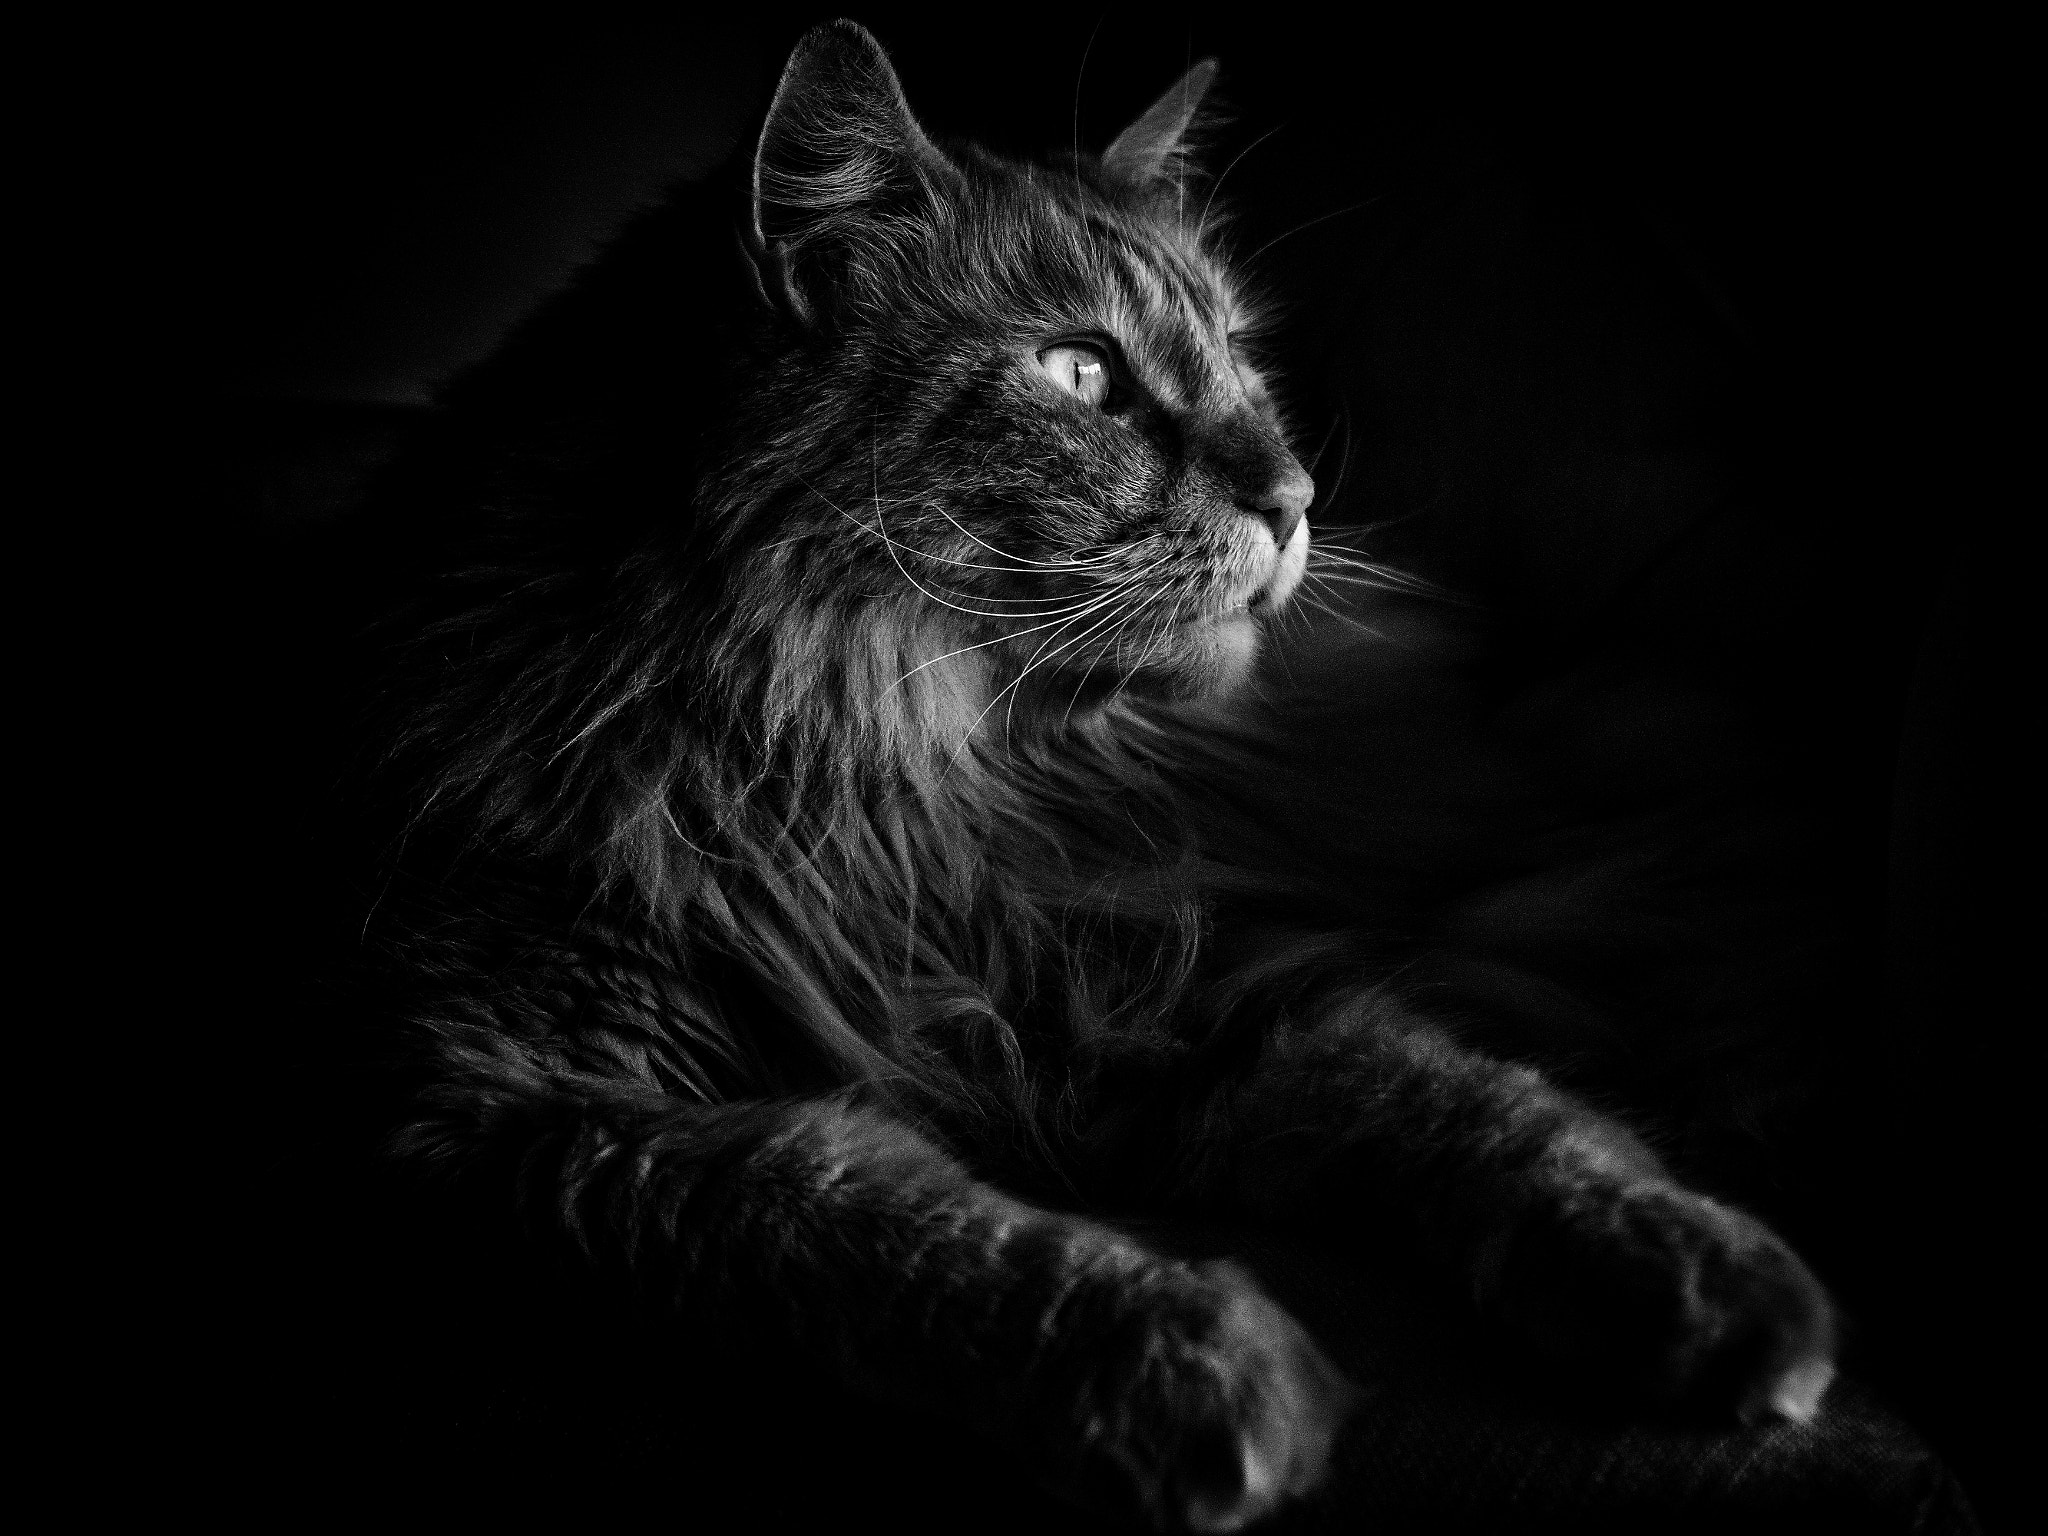 Sony a6300 sample photo. Maine coon kater im licht photography